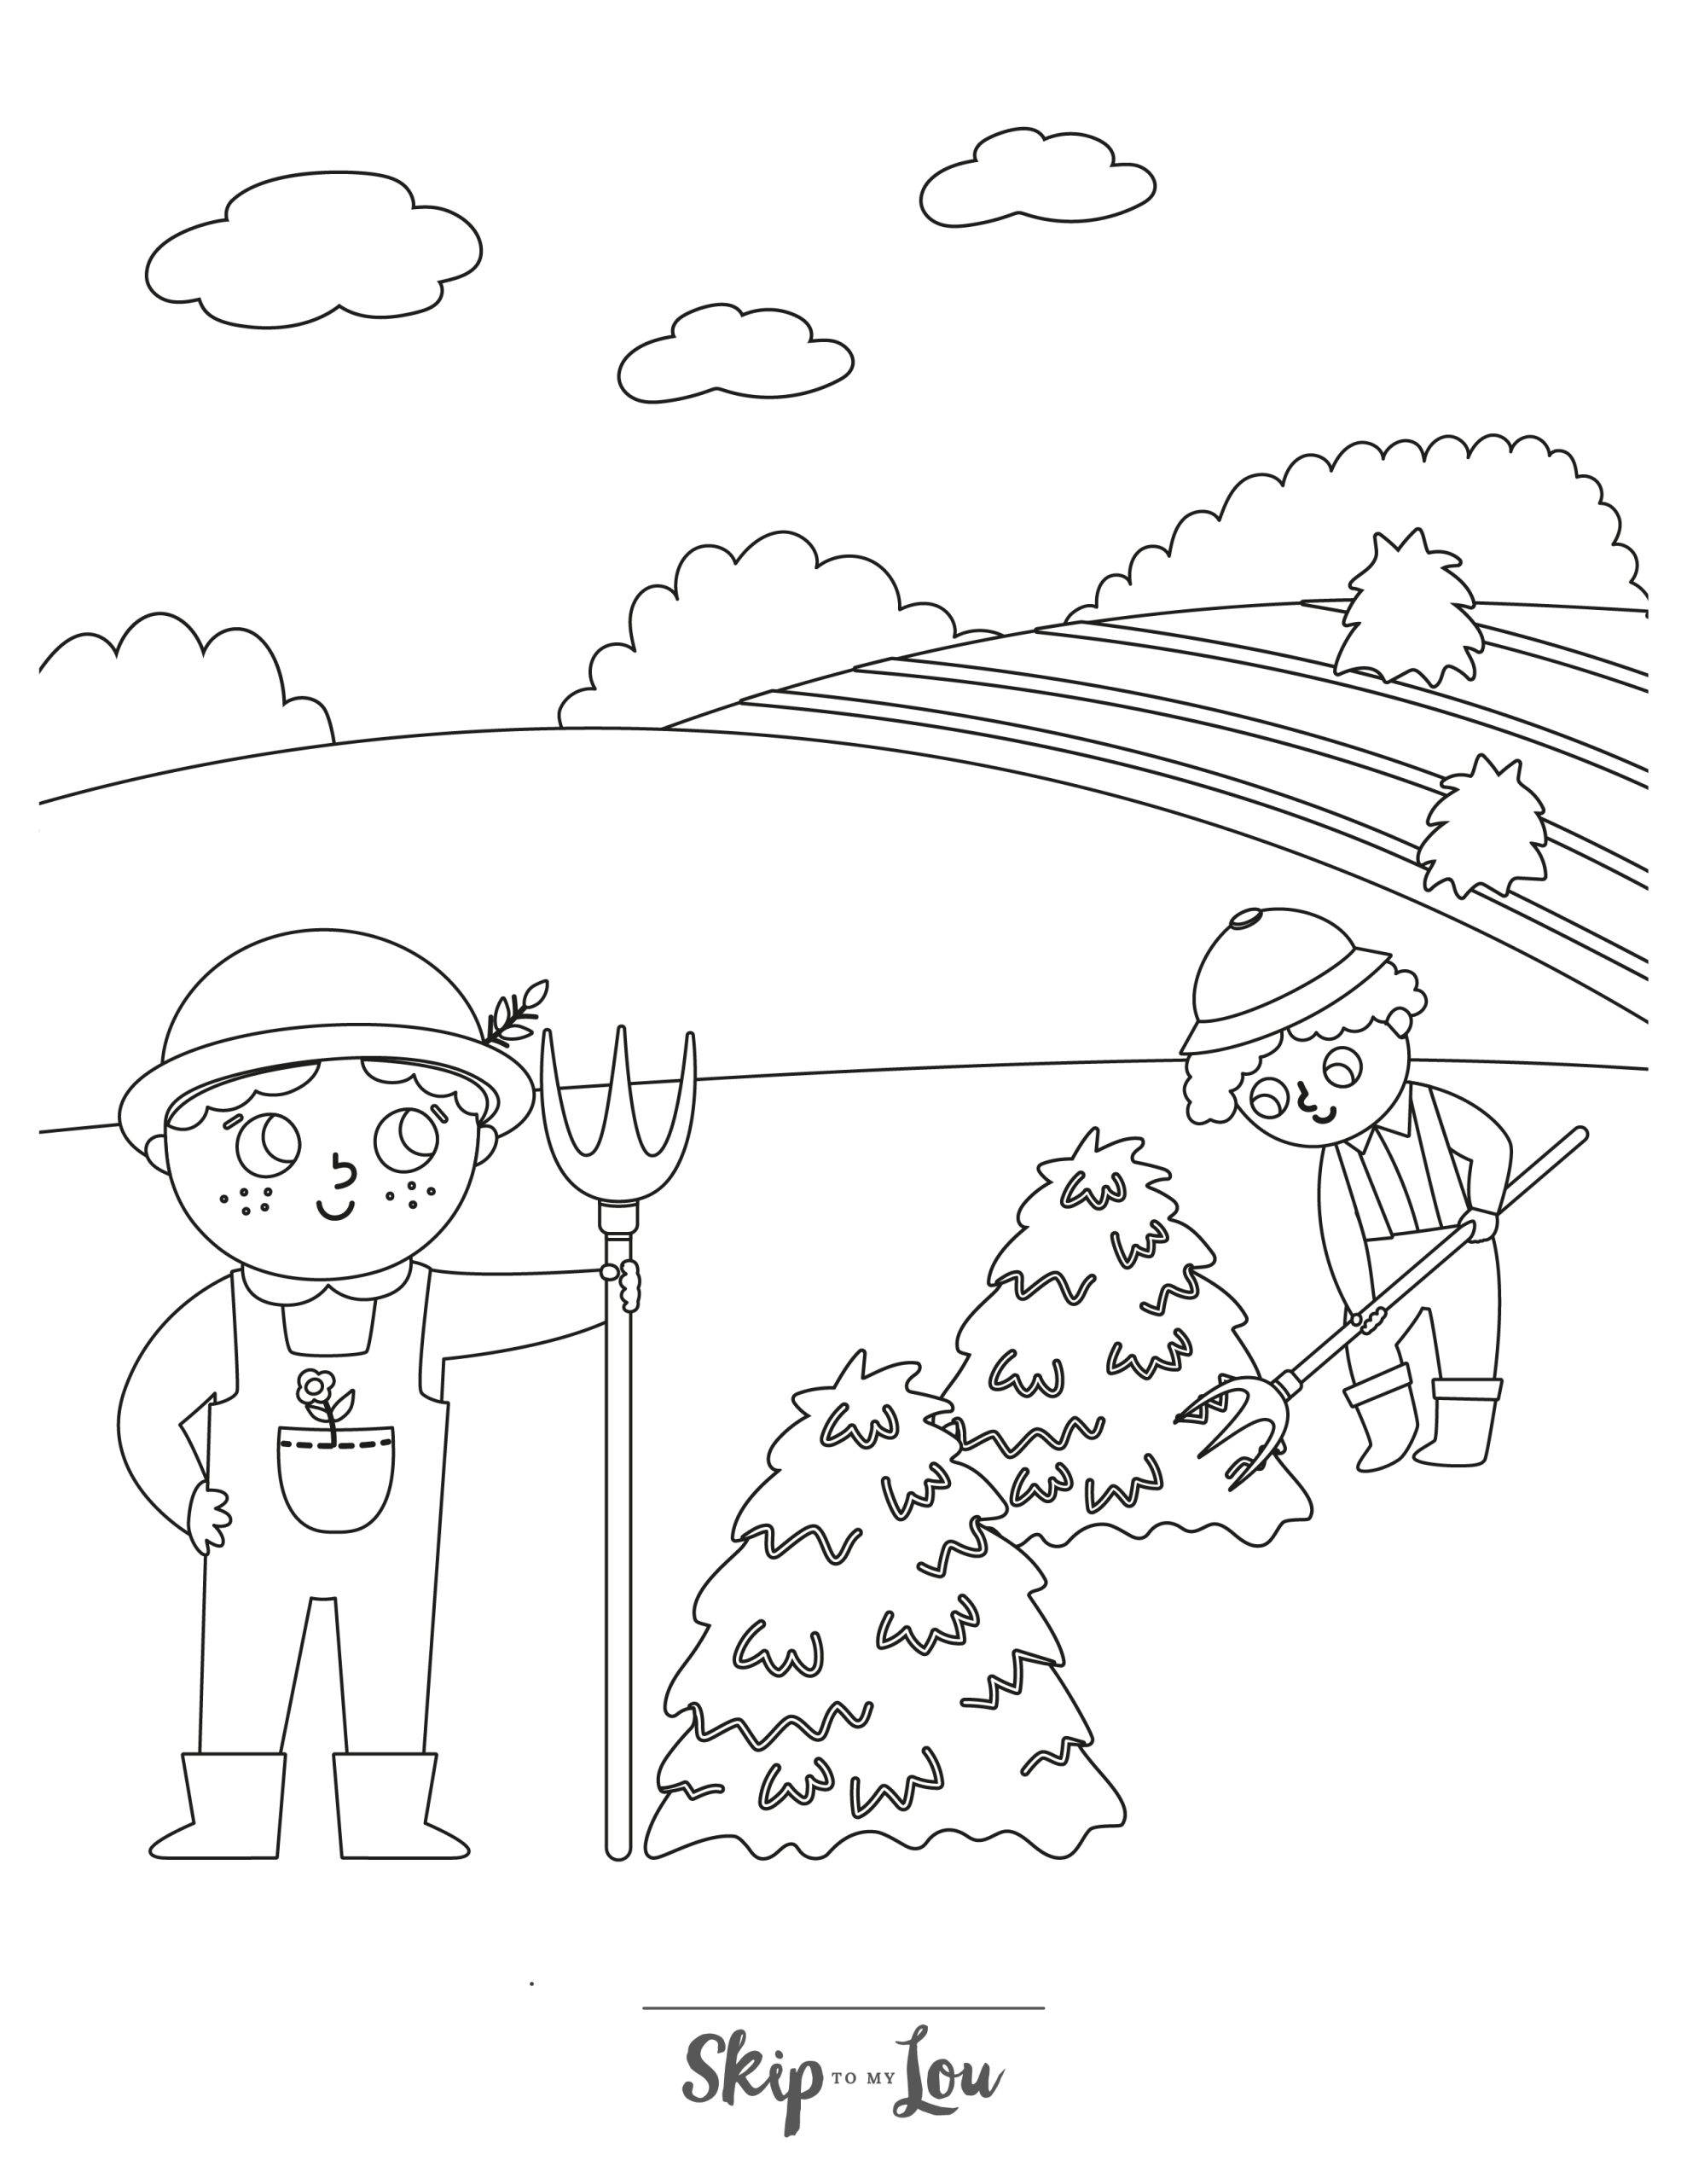 Farm Coloring Page 11 - A line drawing of two people collecting hay with pitchforks. Rolling hills and a field can be seen in the background. 